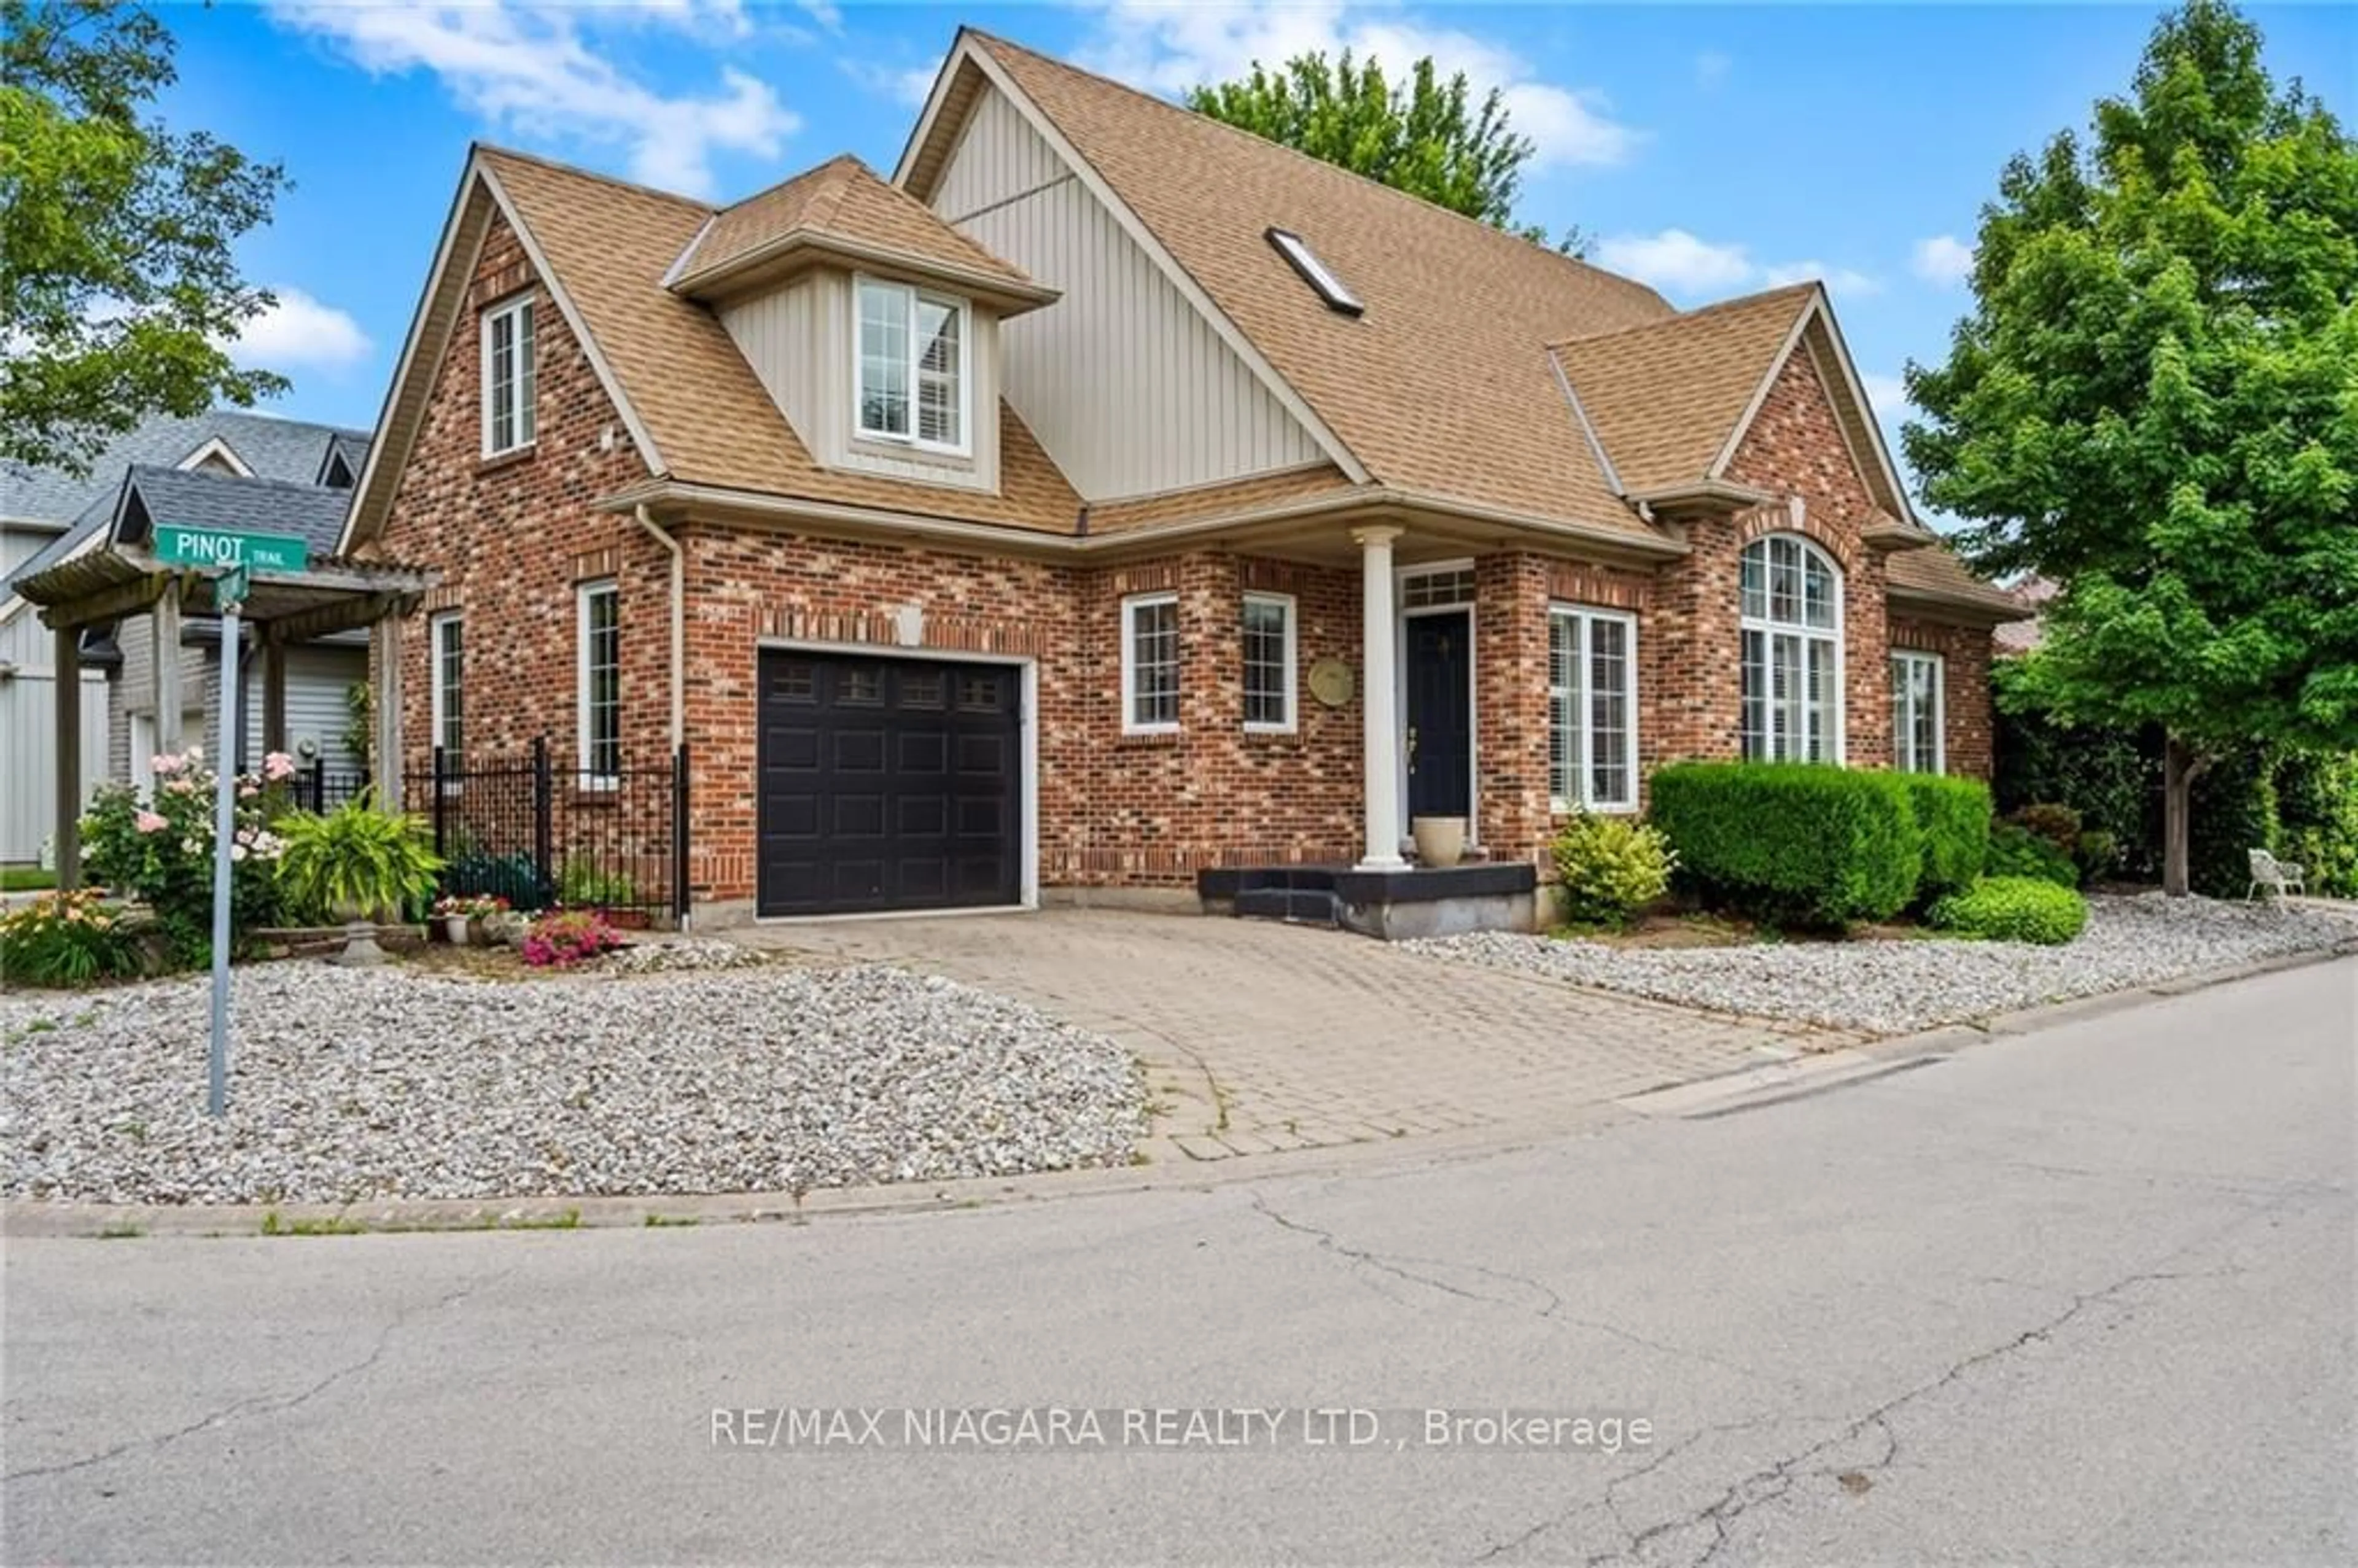 Home with brick exterior material for 2 Chardonnay Pl, Niagara-on-the-Lake Ontario L0S 1T0